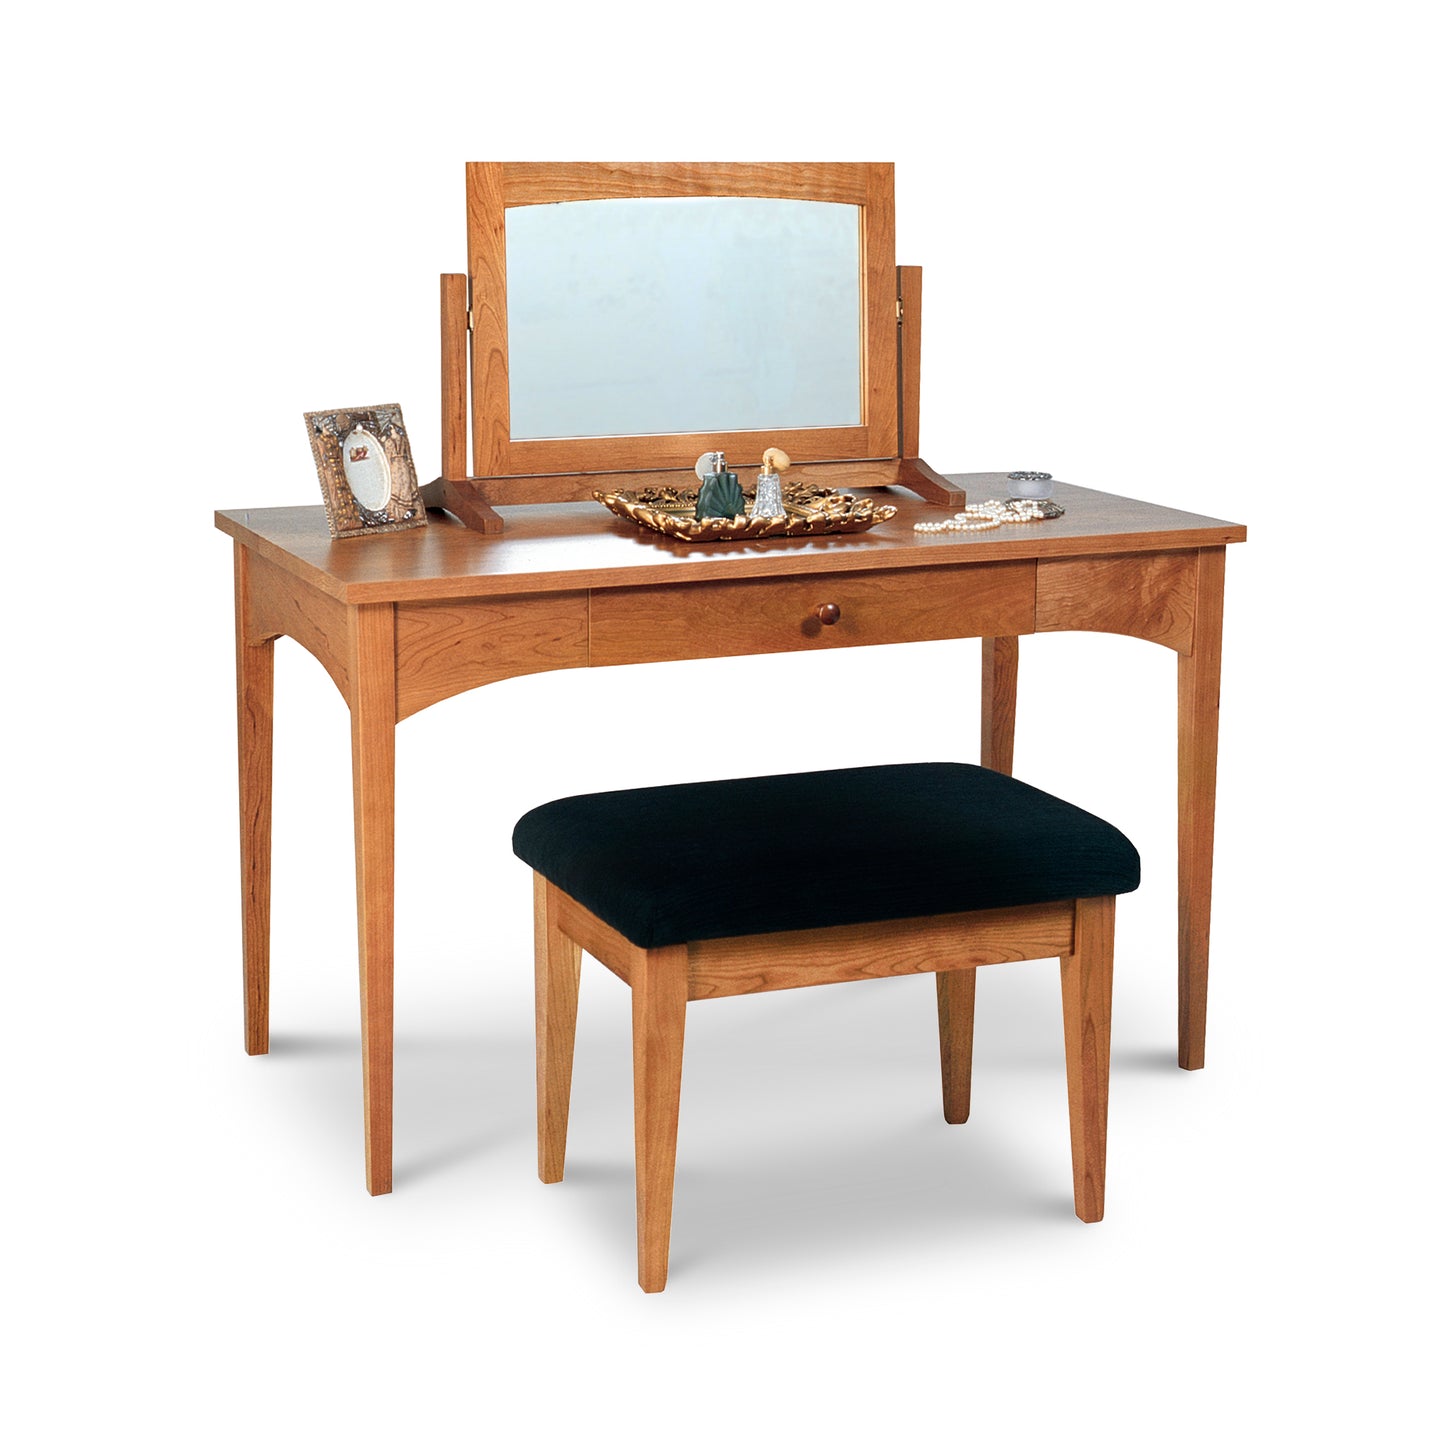 A New England Shaker Ladies' Dressing Table with a mirror and stool by Lyndon Furniture.